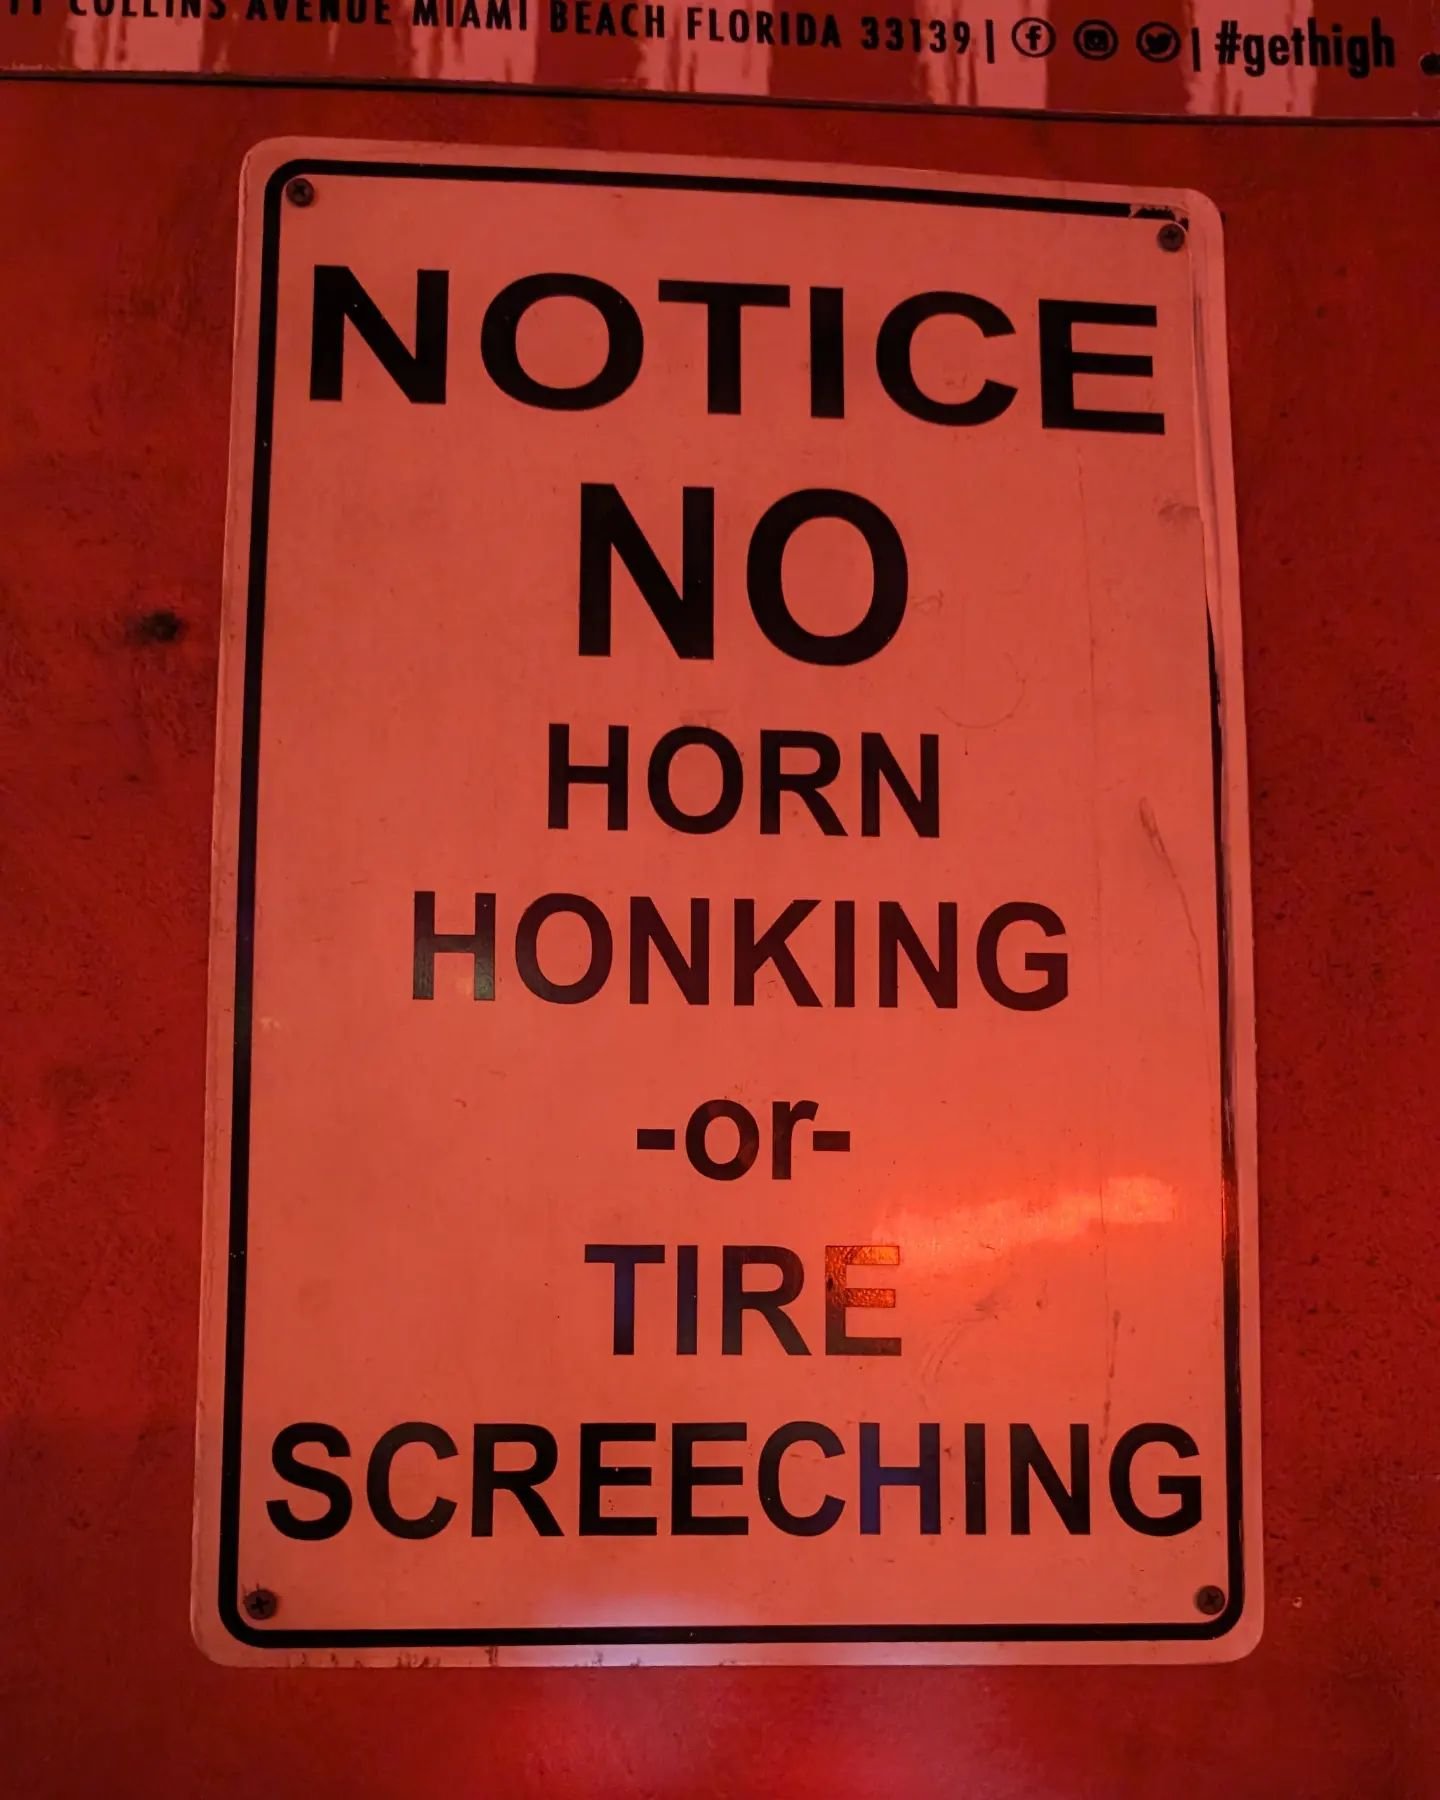 For all you horn honking, tire screeches....